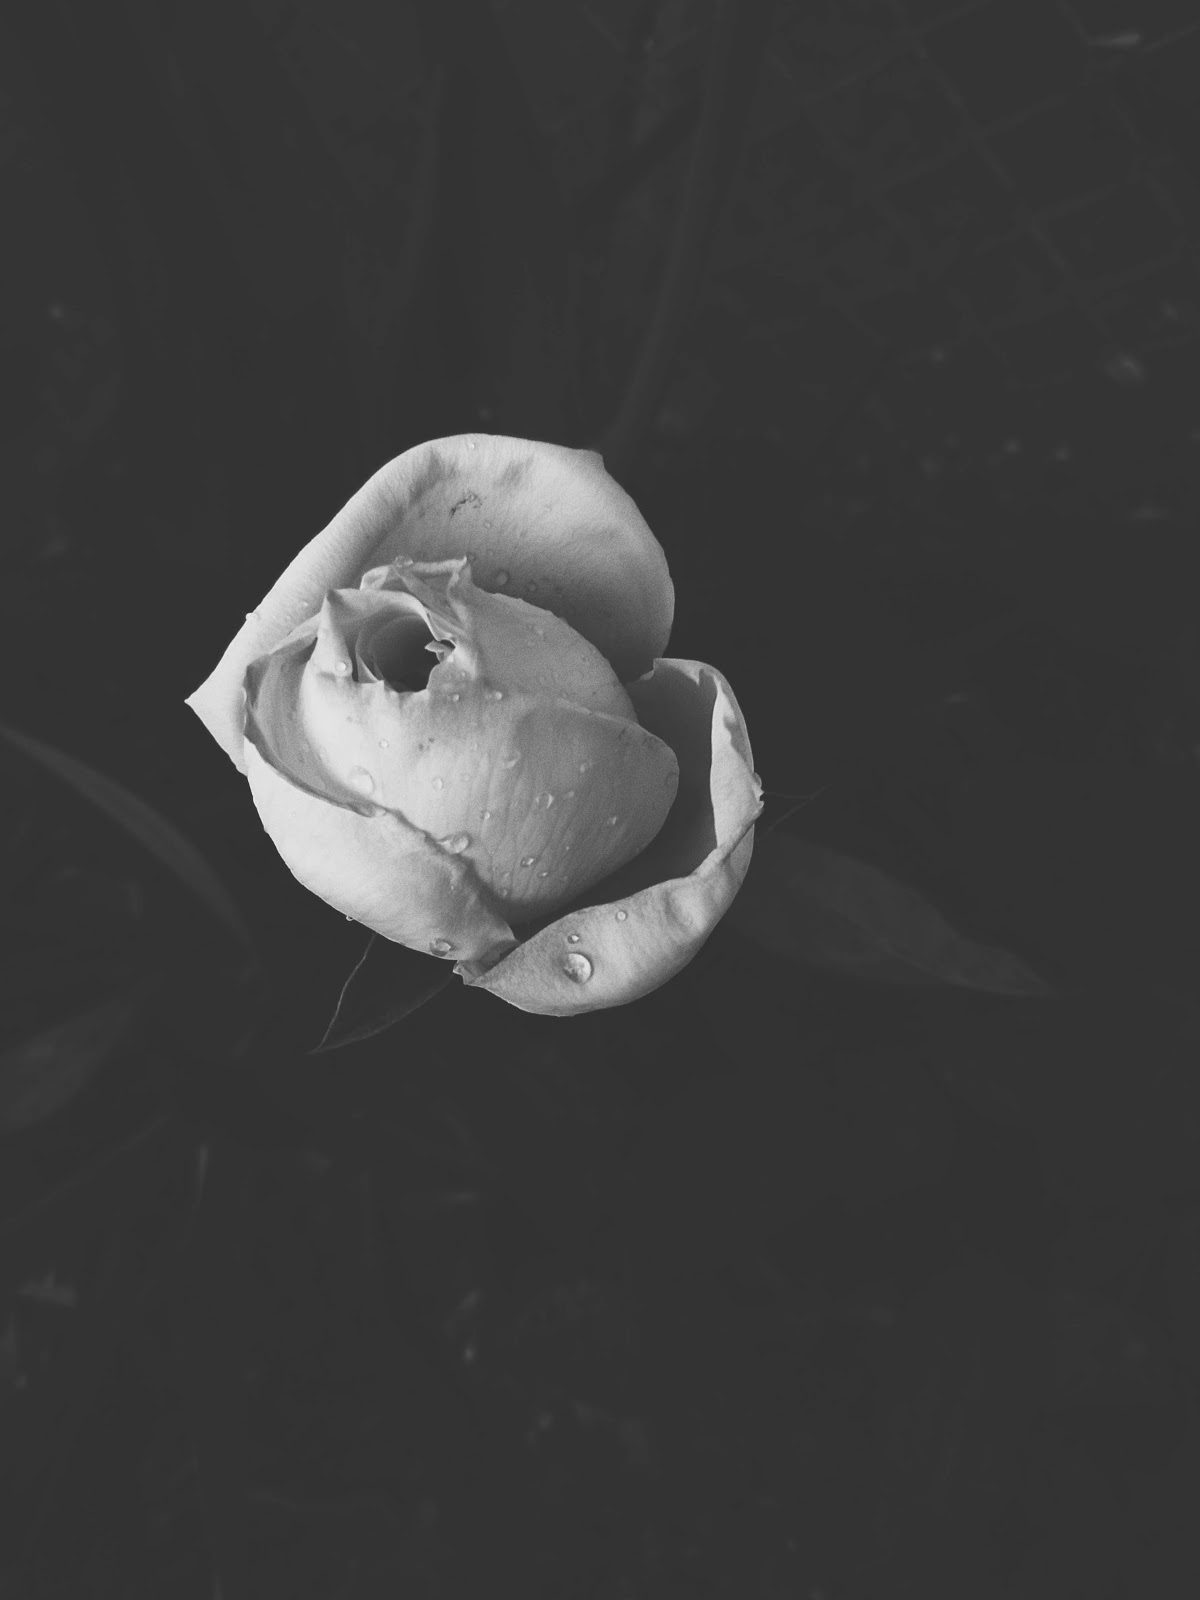 yellow rose // life in black & white series // www.thejoyblog.net